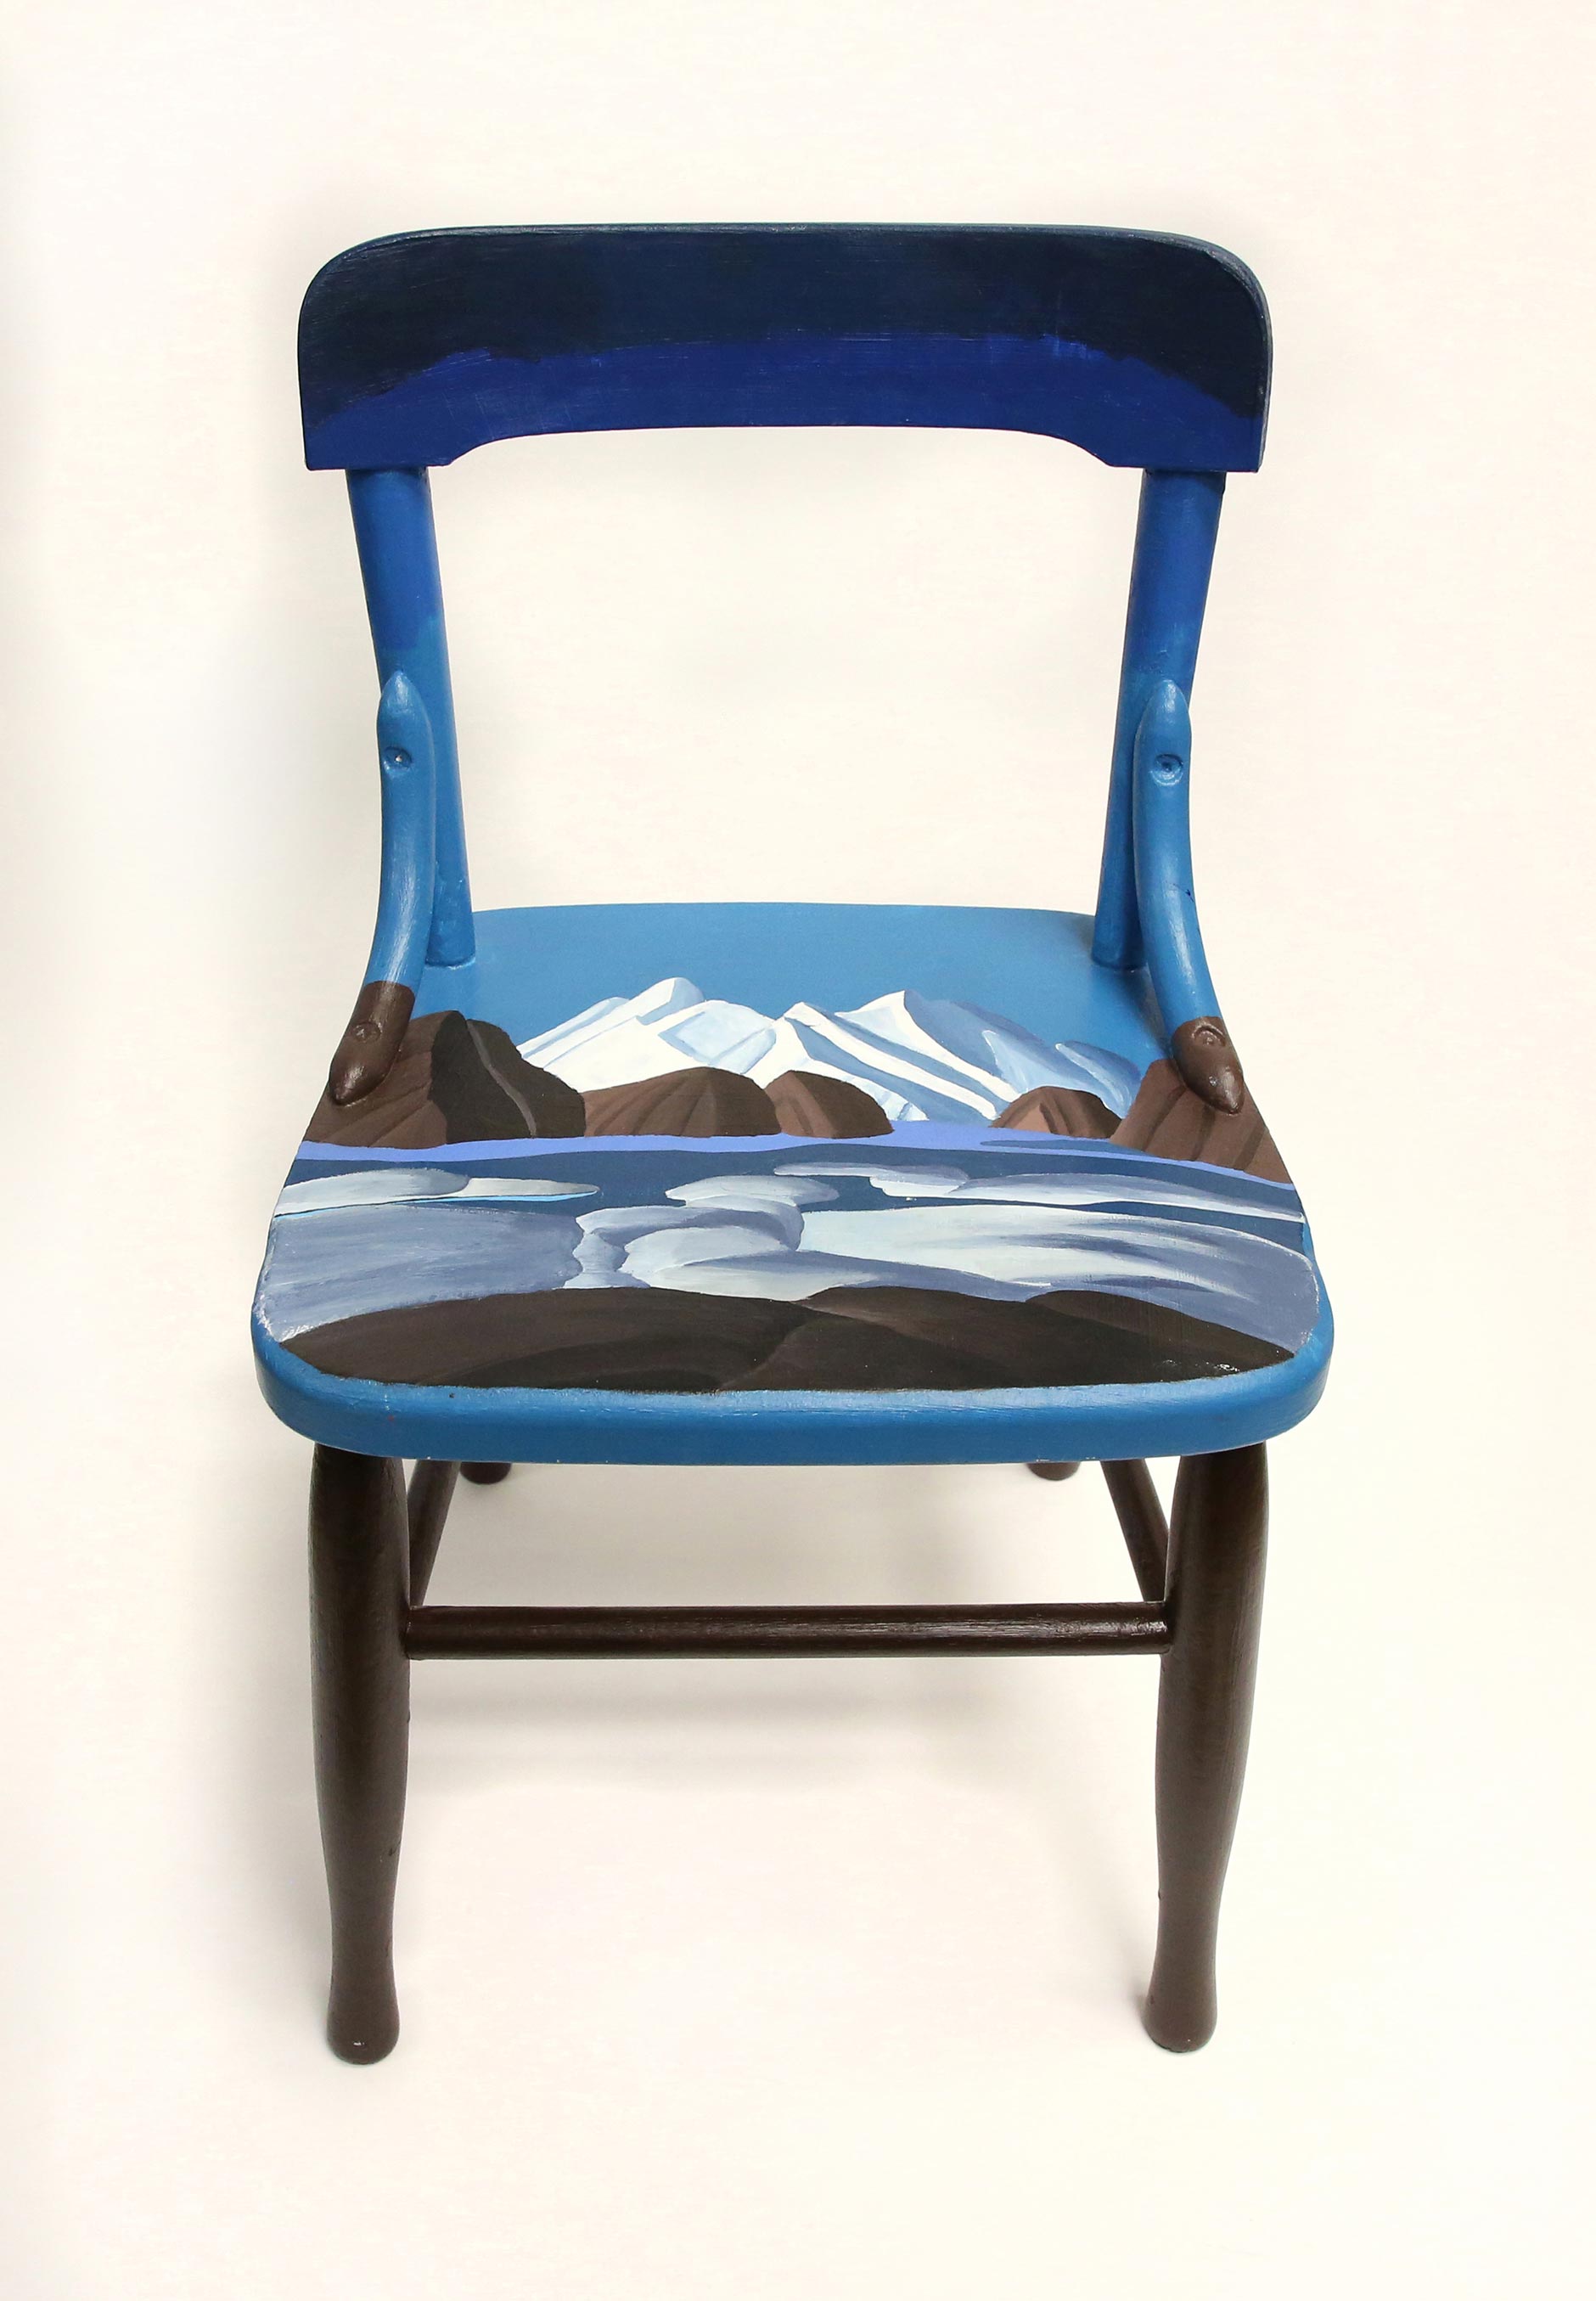 A painted chair by a student artist in the 2020 Youth Arts Program